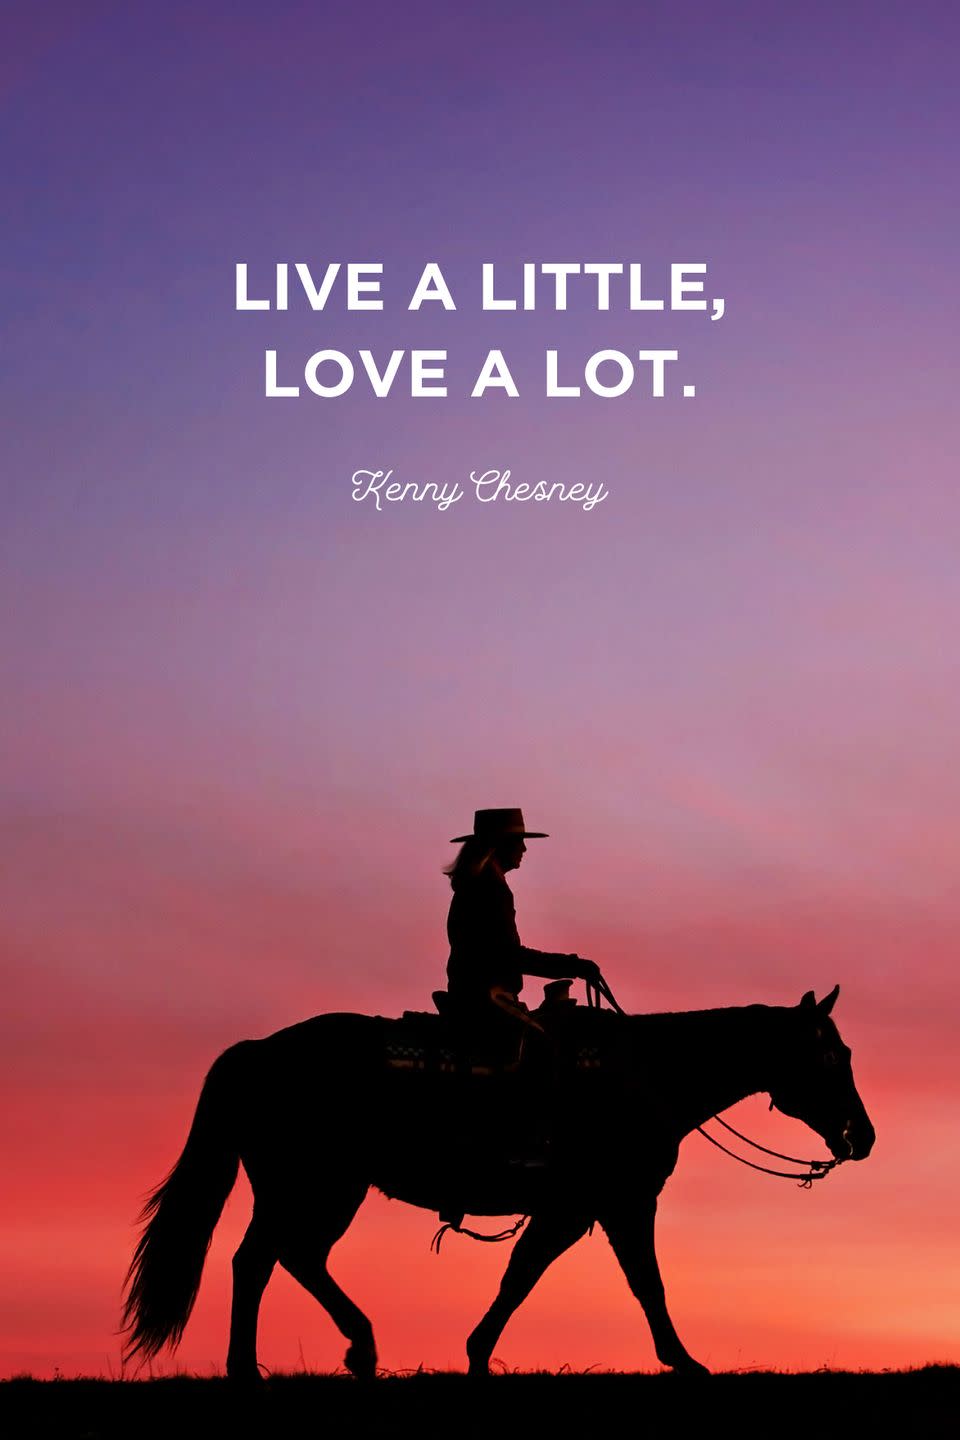 Kenny Chesney, "Live a Little"